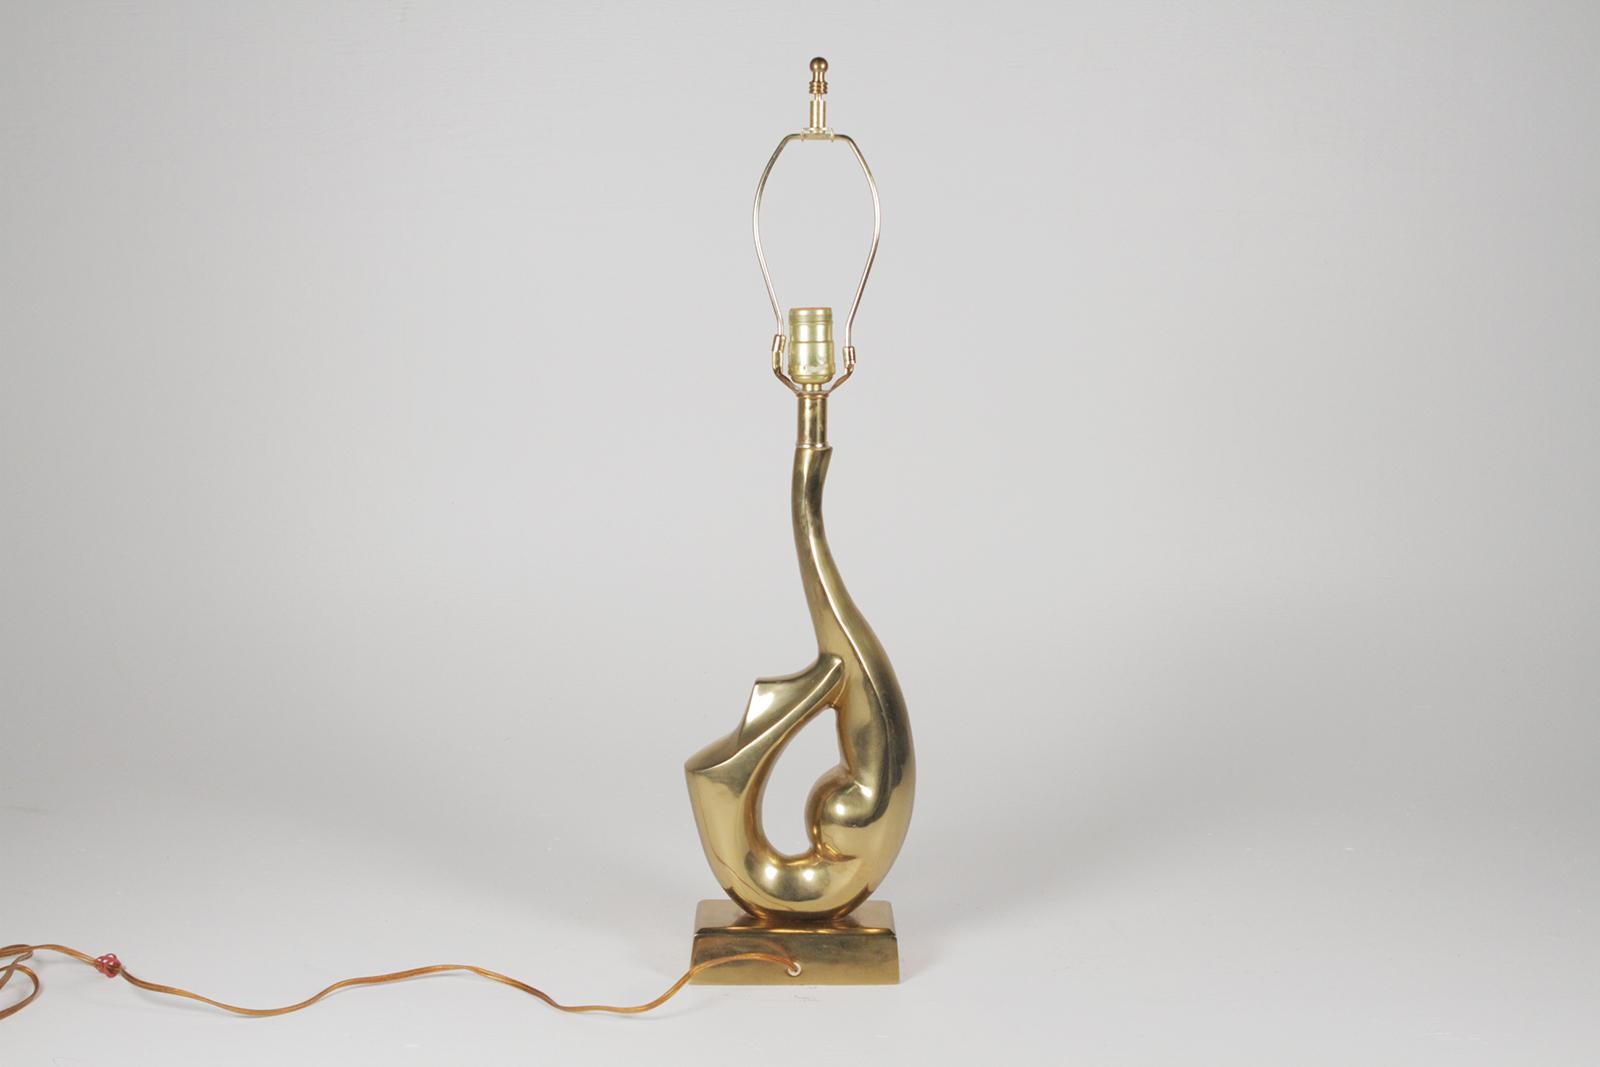 American Midcentury Brass Lamp in the Form of a Swimmer